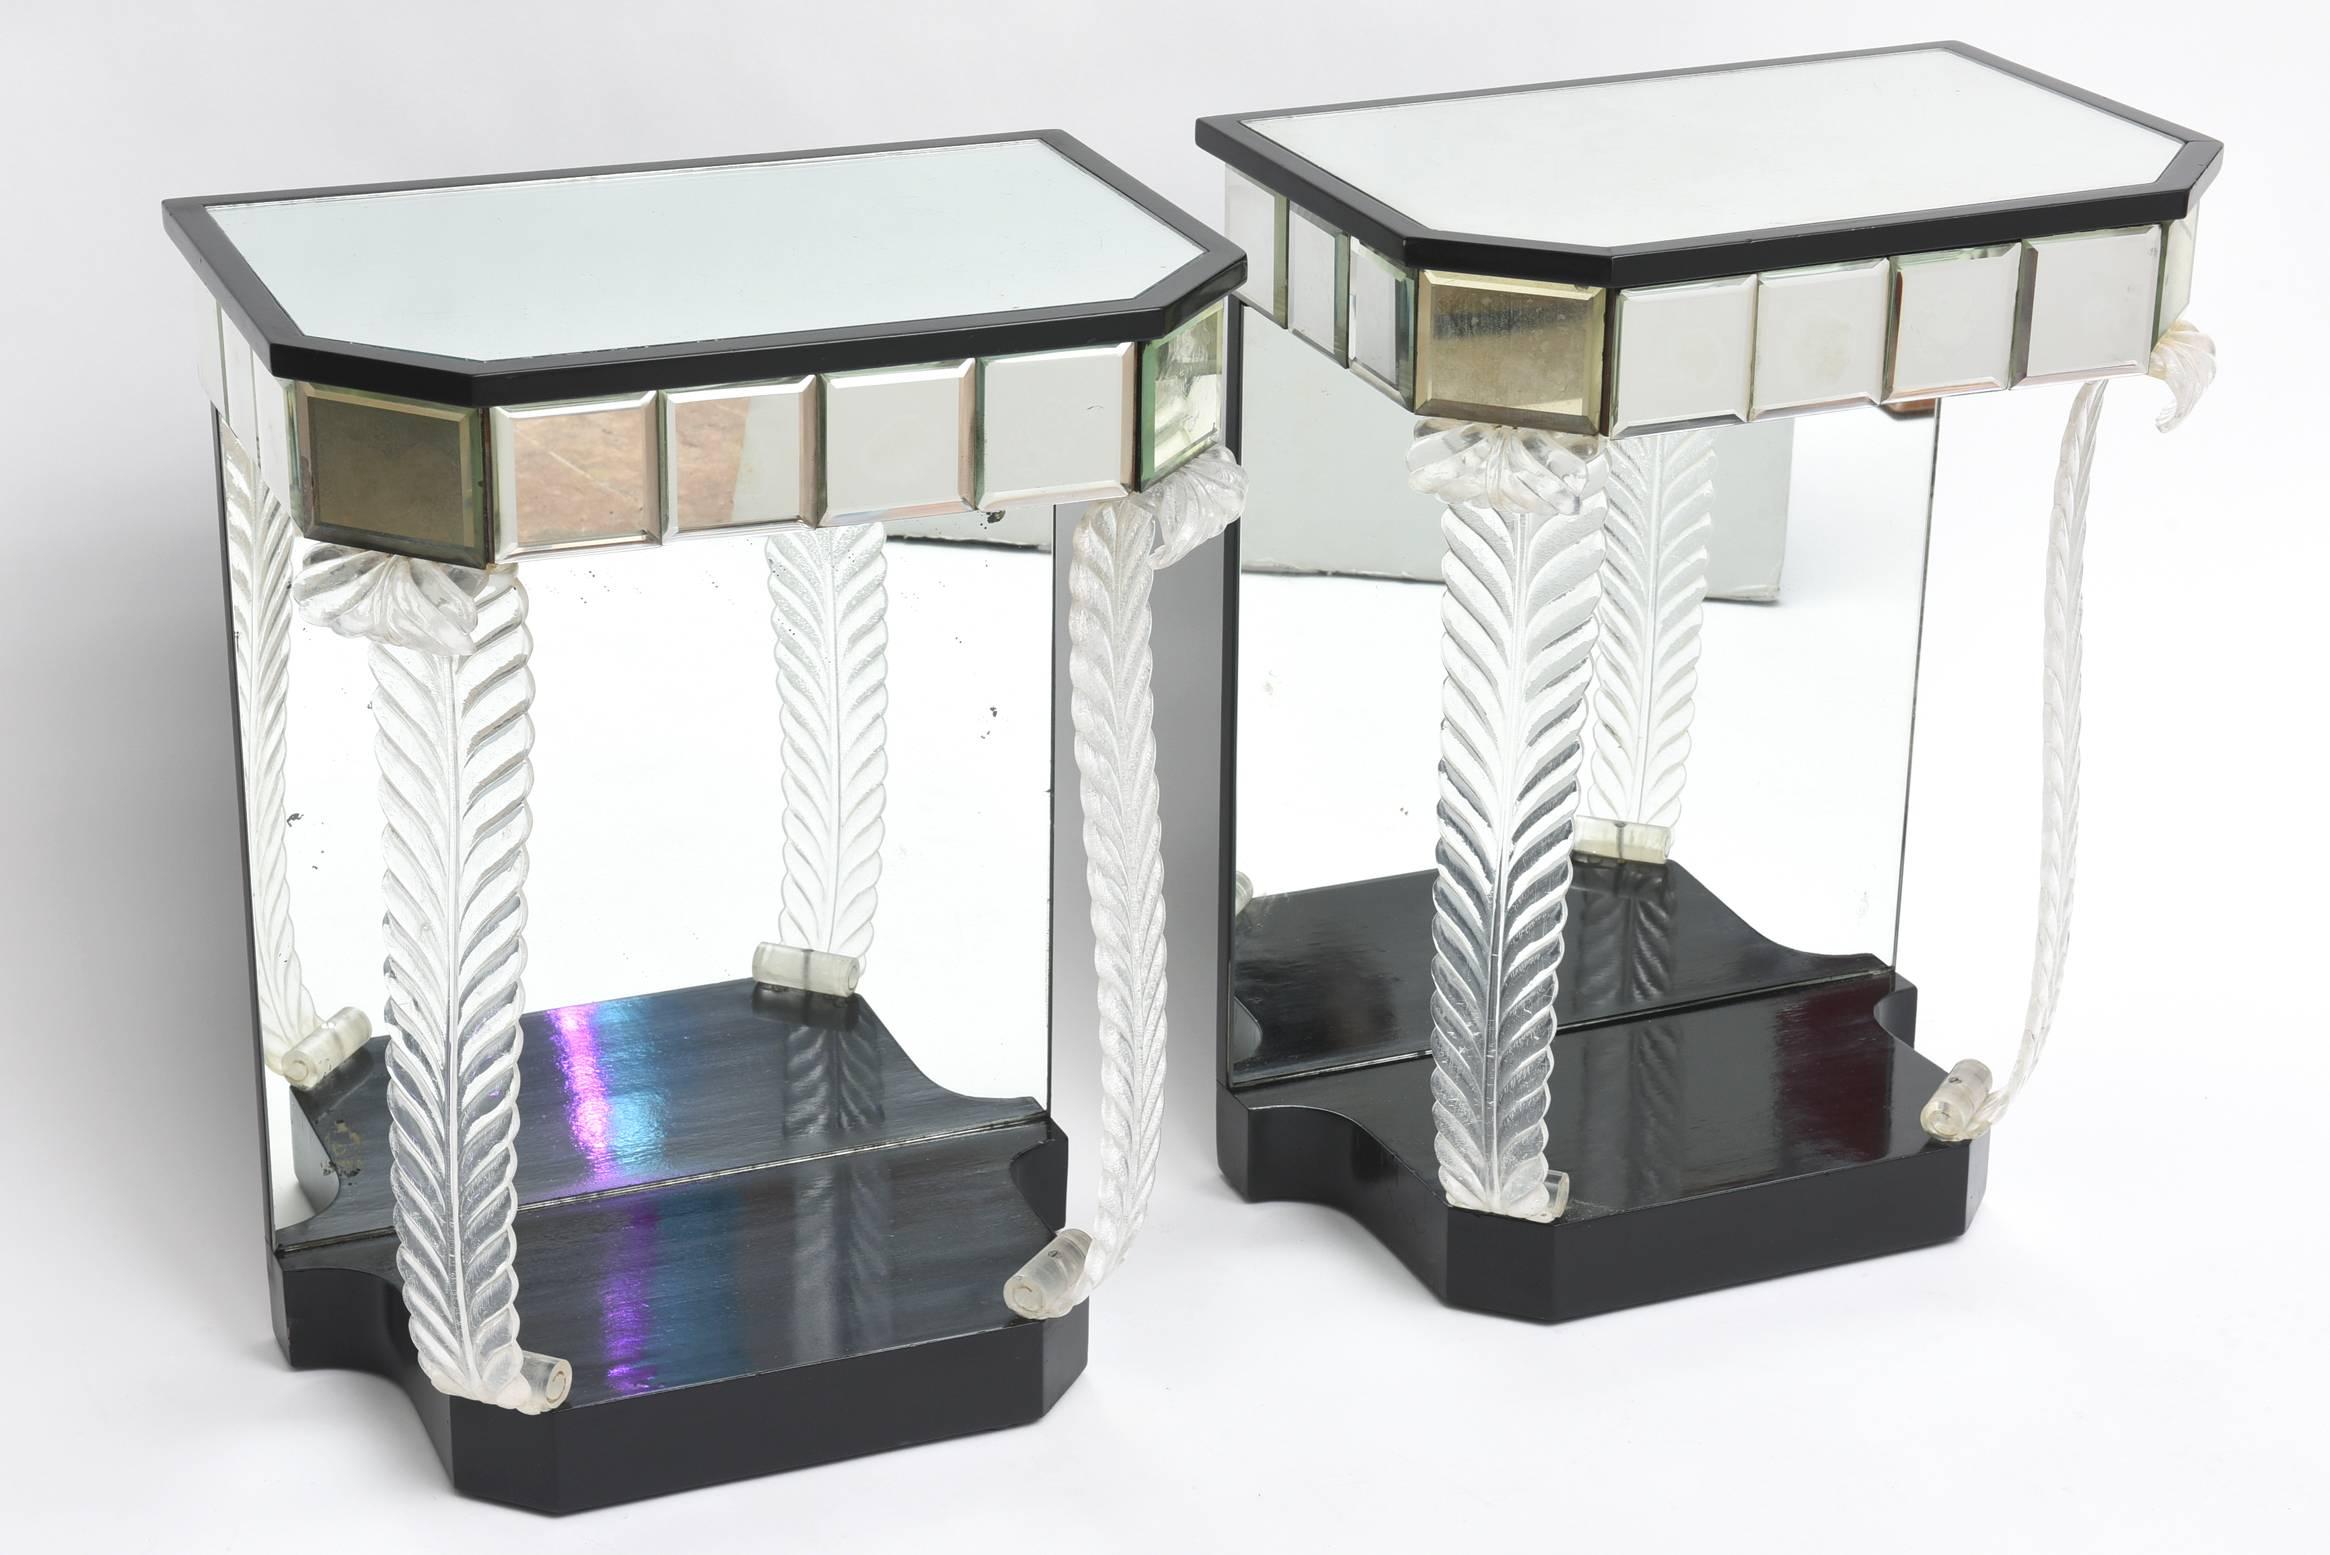 Designed by Loron Jackson for Grosfeld House.
Lucite and mirror, label inside the drawer.